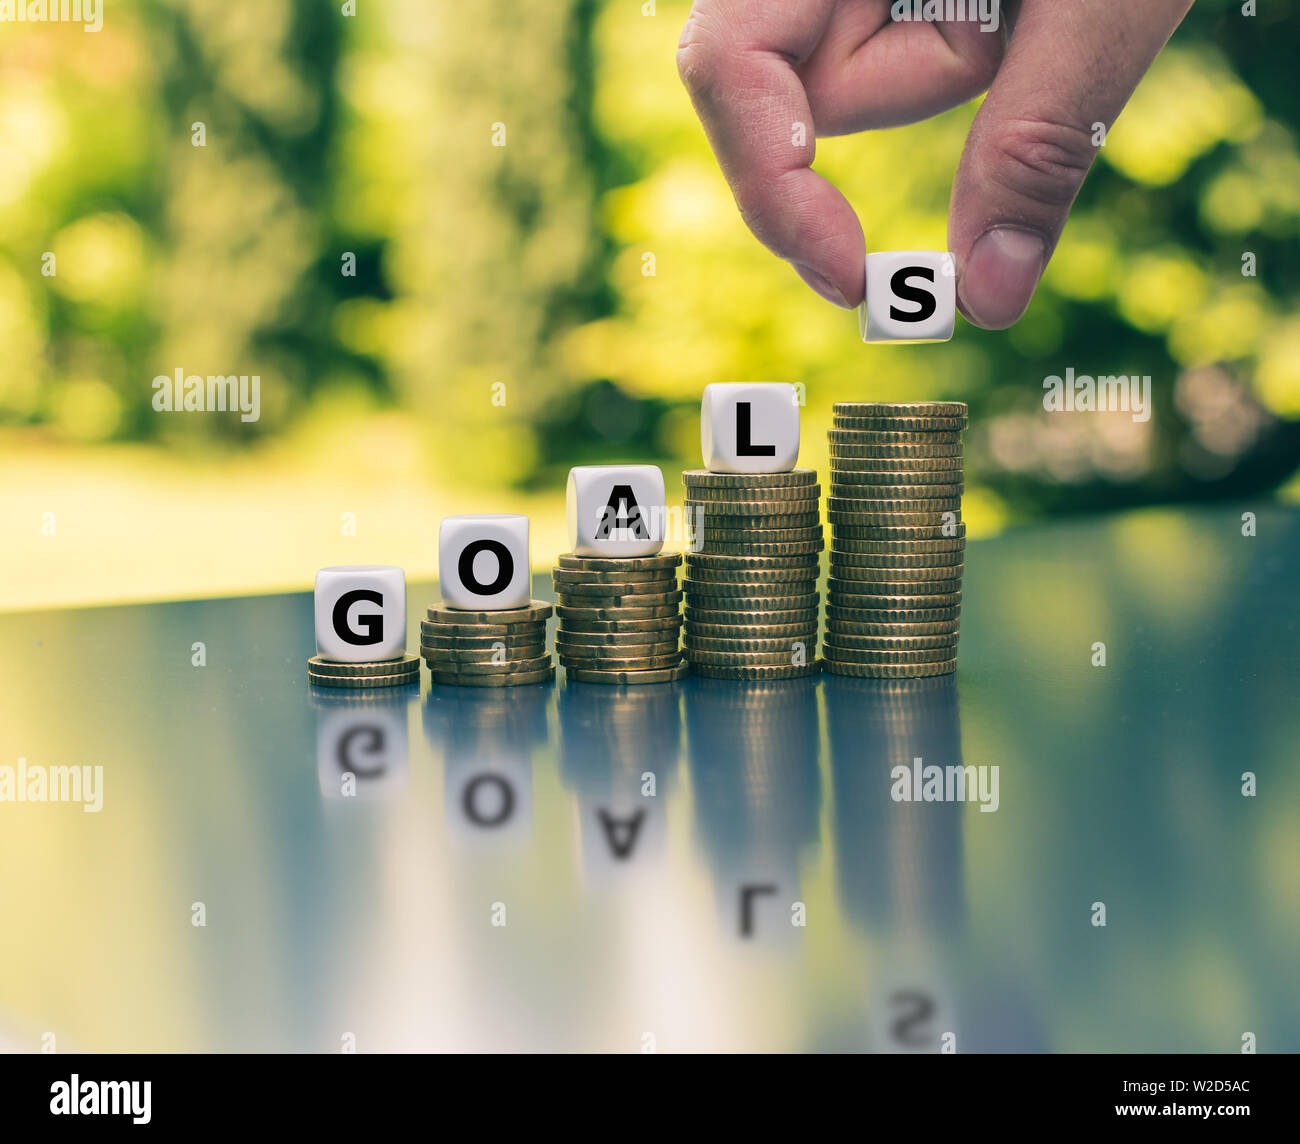 Concept of financial goals. Dice placed on increasing high stacks of coins form the word 'GOALS'. Stock Photo